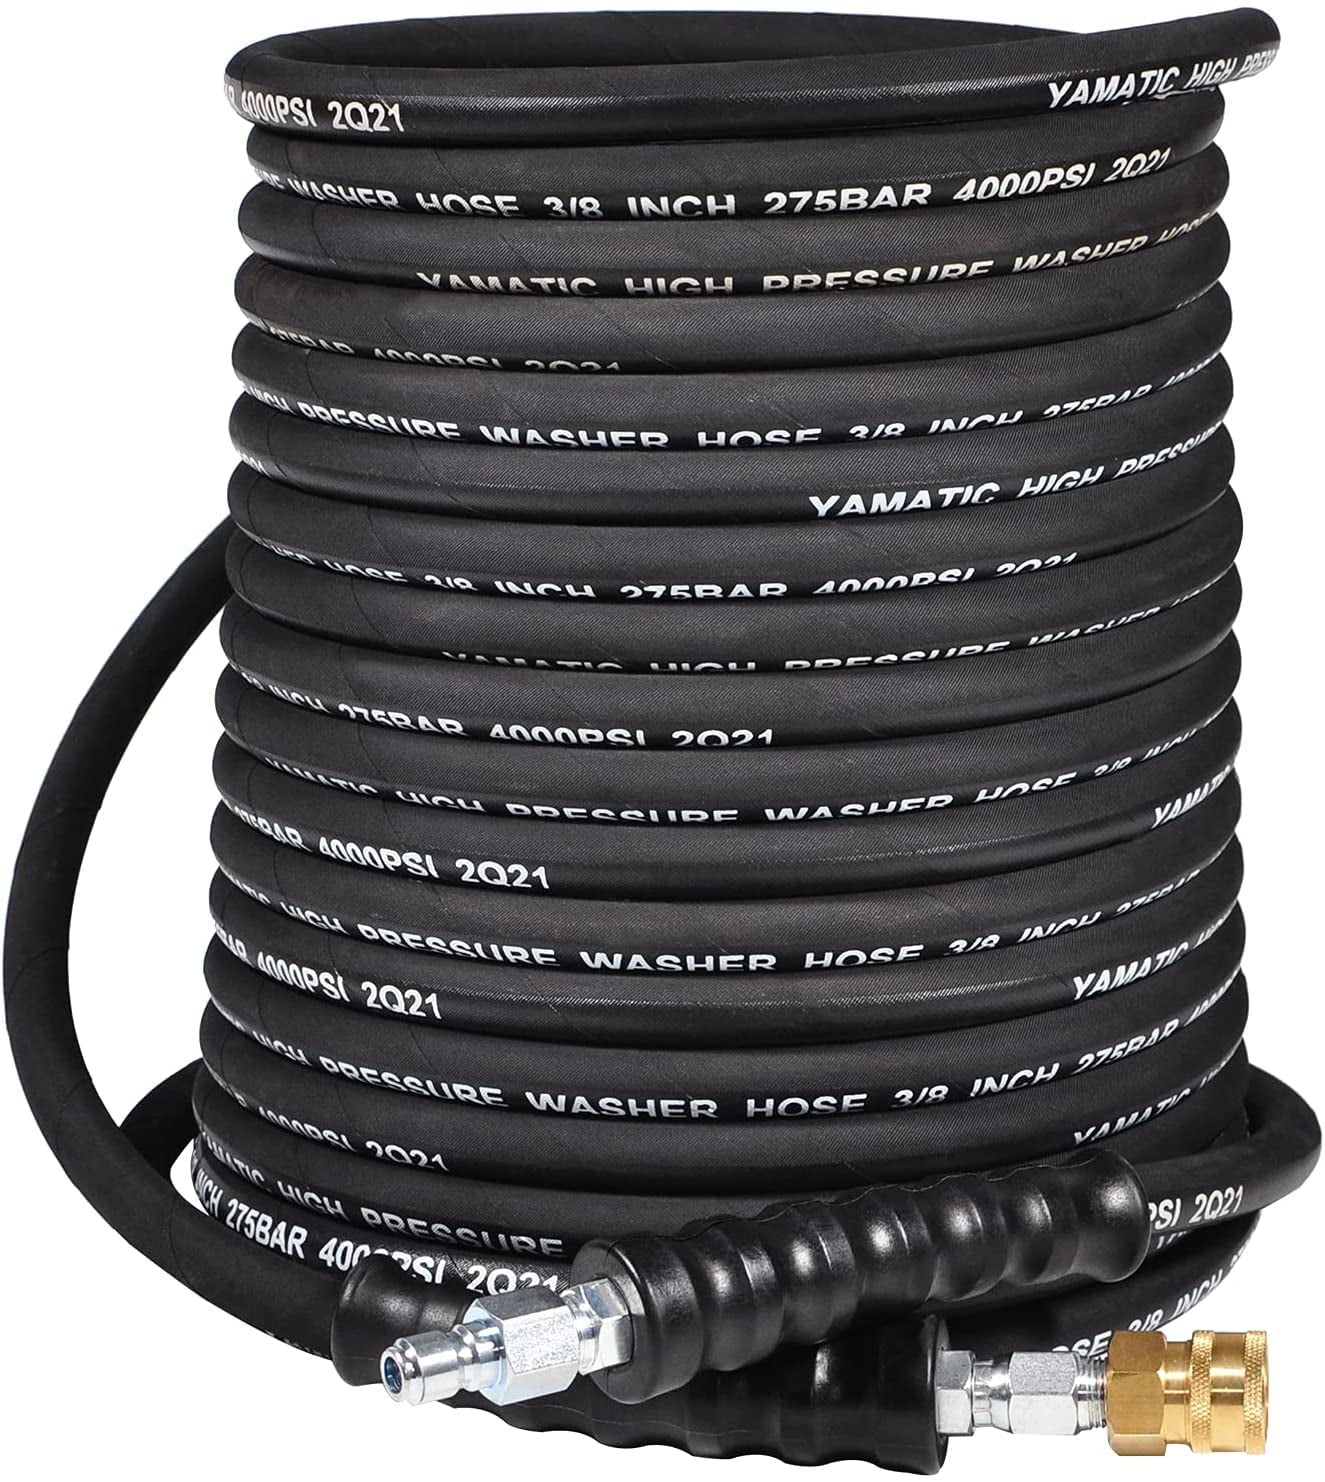 YAMATIC 3/8 Pressure Washer Hose 50 FT with Swivel Quick Connect